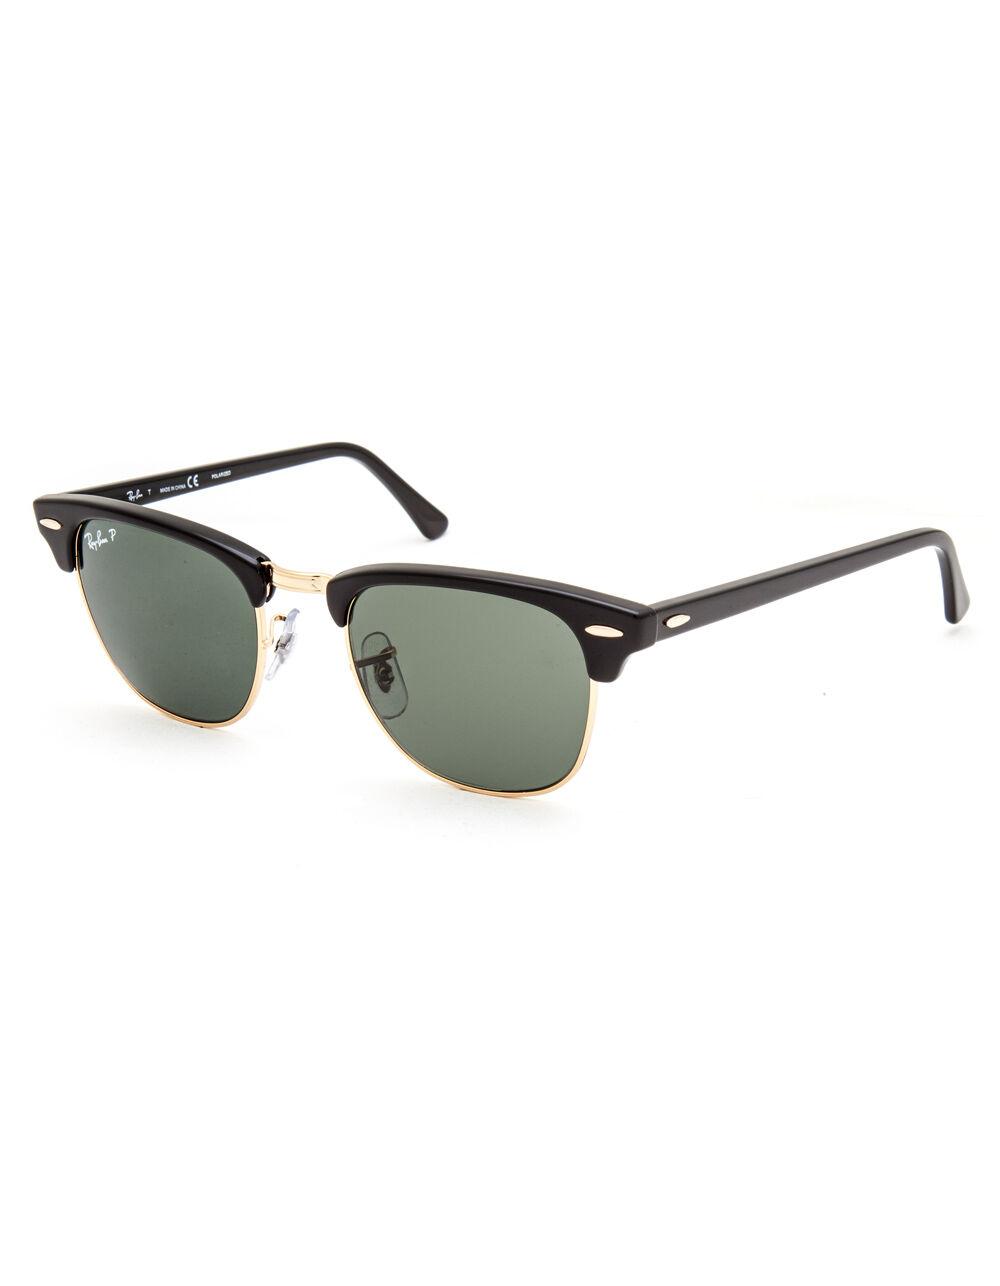 Ray-Ban Clubmaster Classic Polarized Sunglasses in Black for Men - Lyst